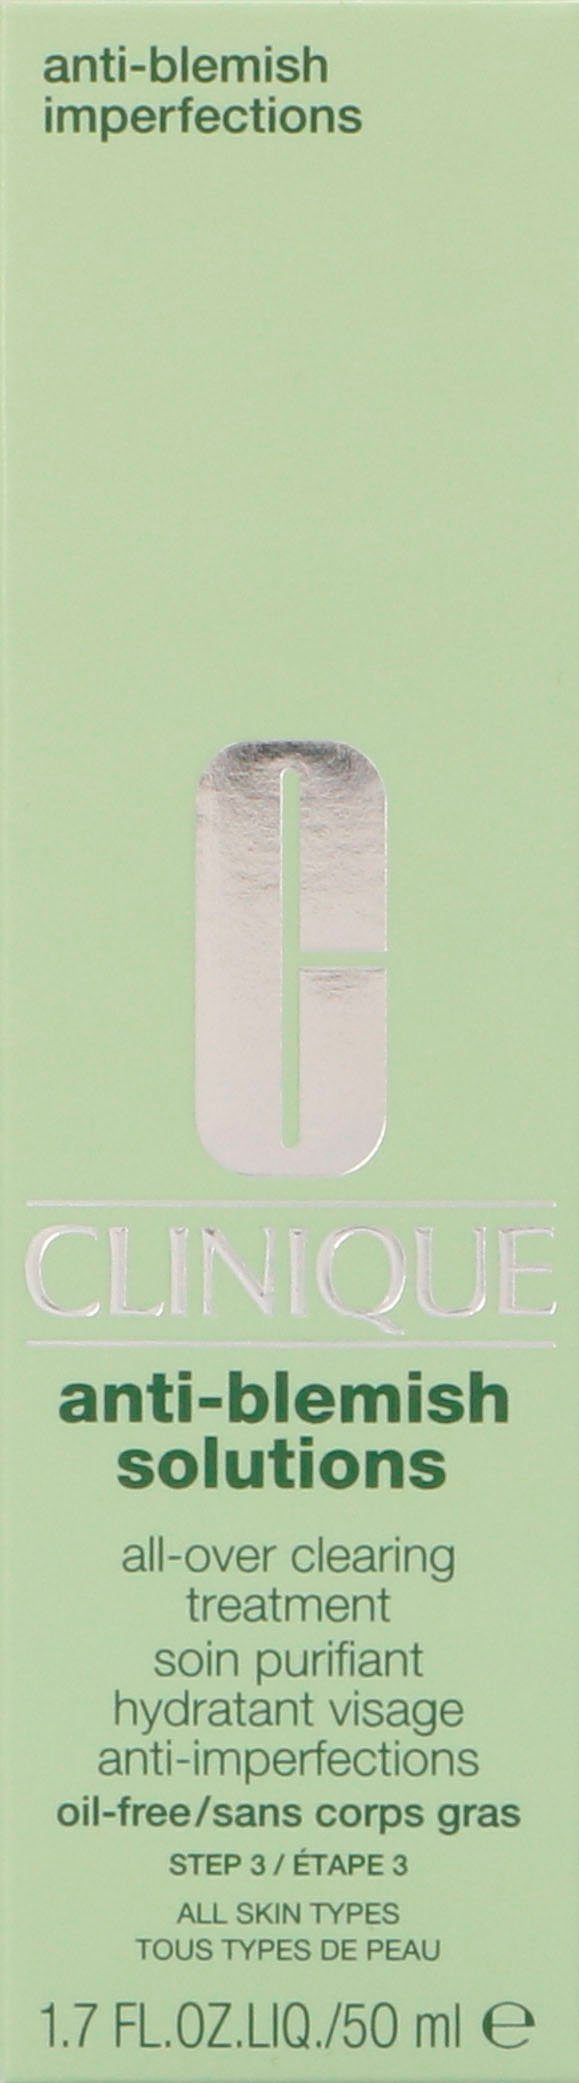 Solutions Anti-Blemish CLINIQUE Clearing All-Over Treatment Gesichts-Reinigungscreme